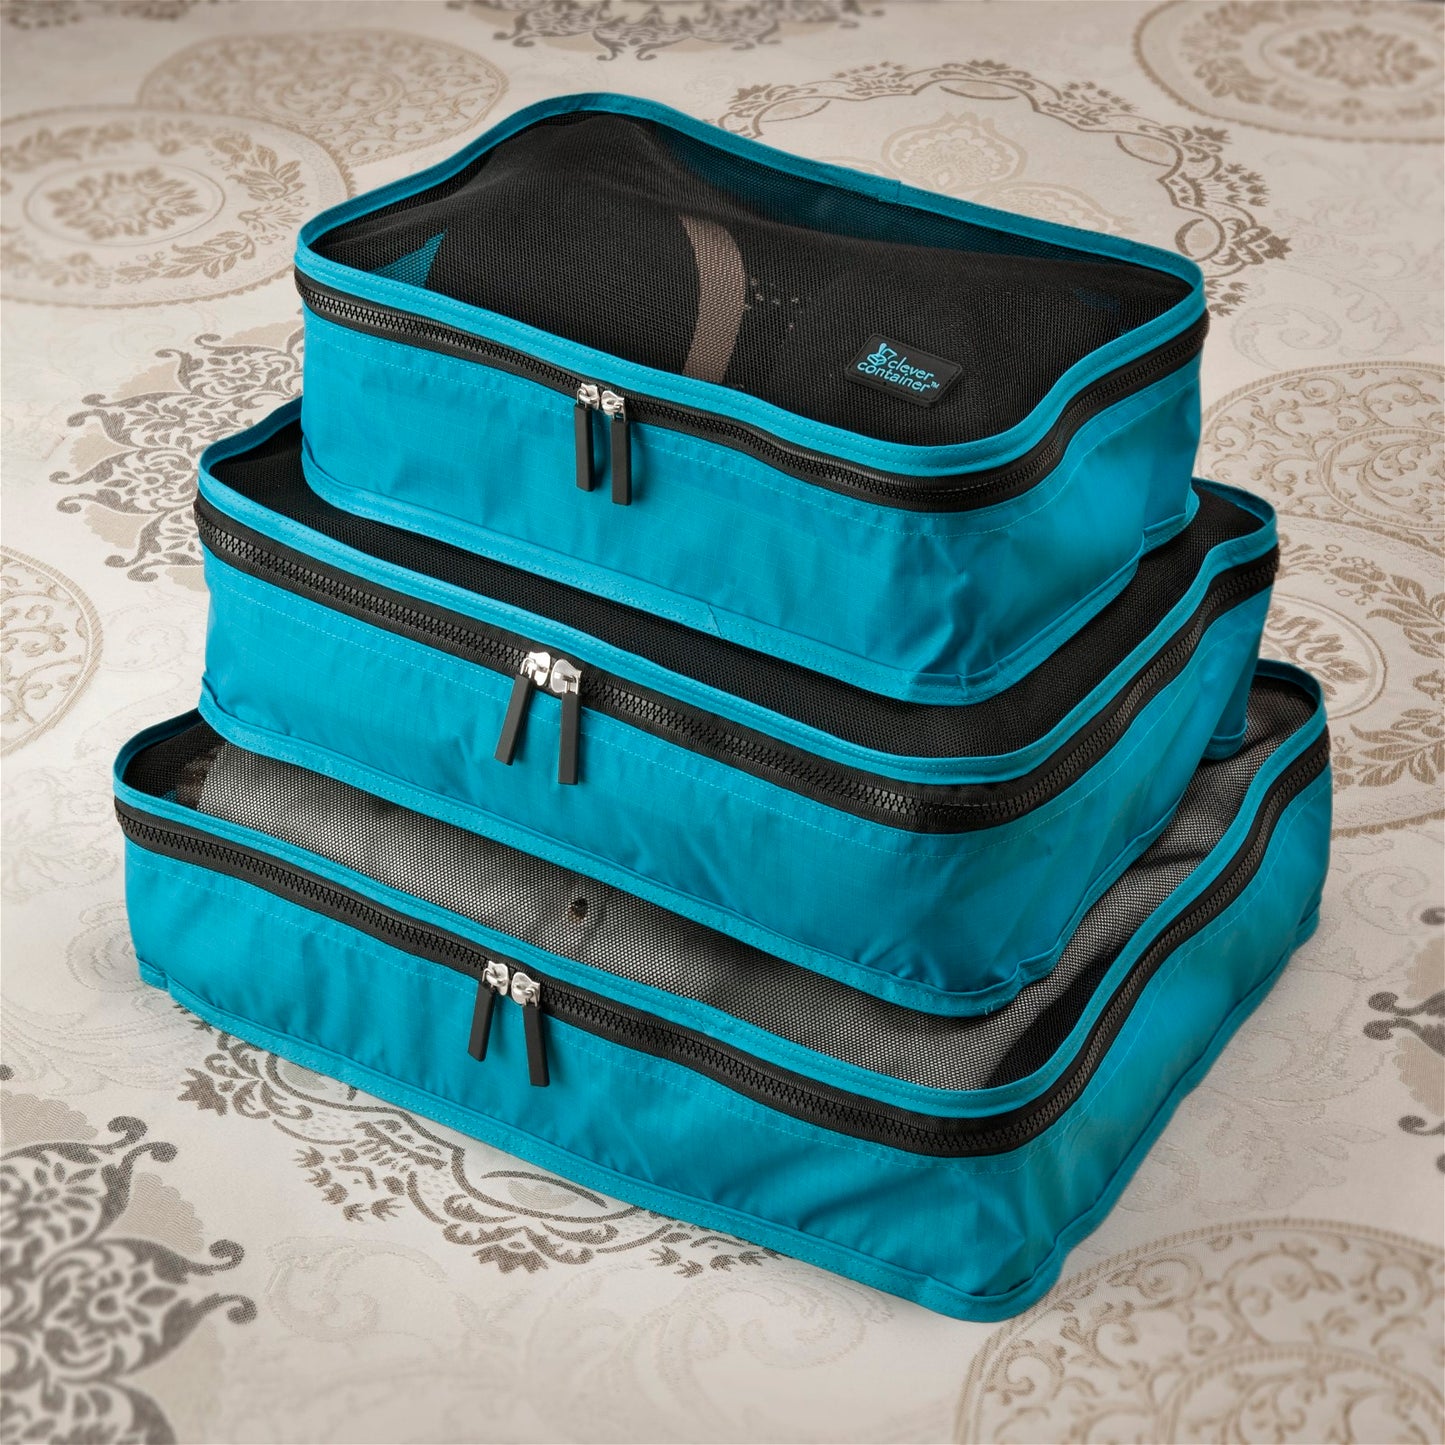 Packing Cubes - Teal - Set of 2 - Small & Large - Bundle